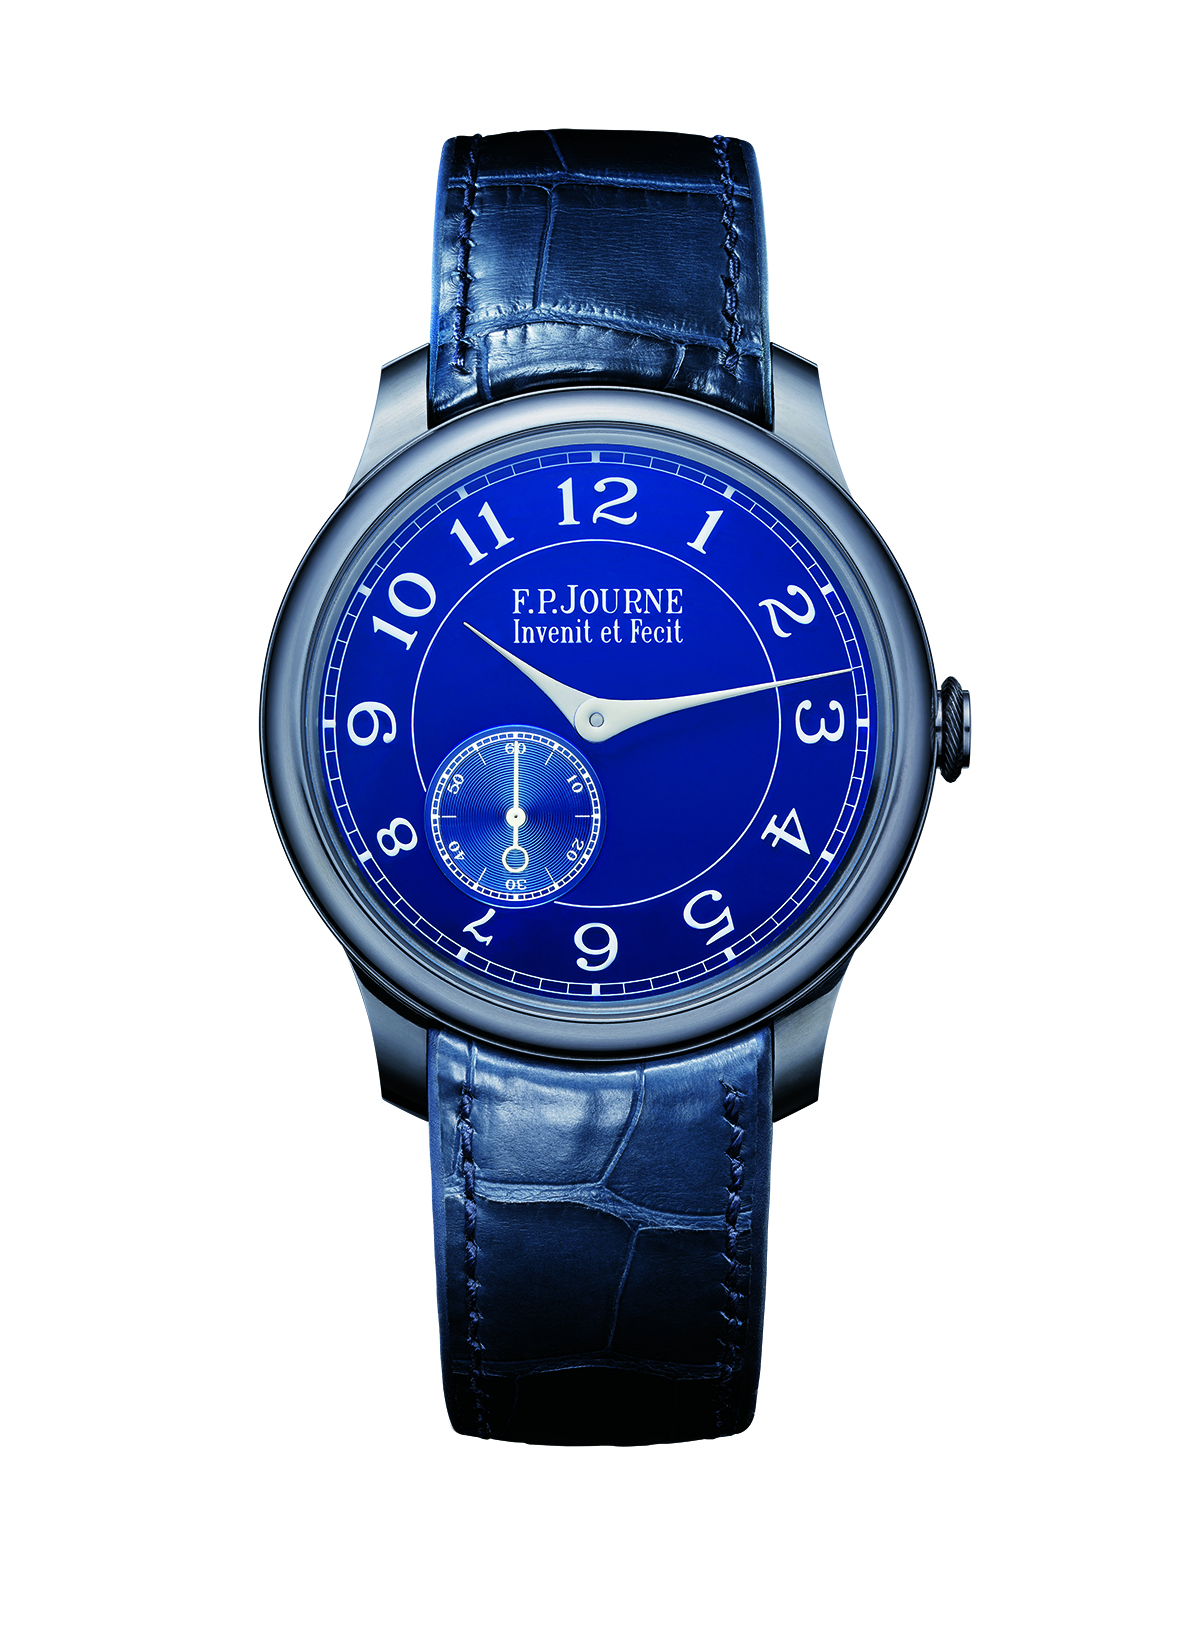 a blue watch with a blue face and strap